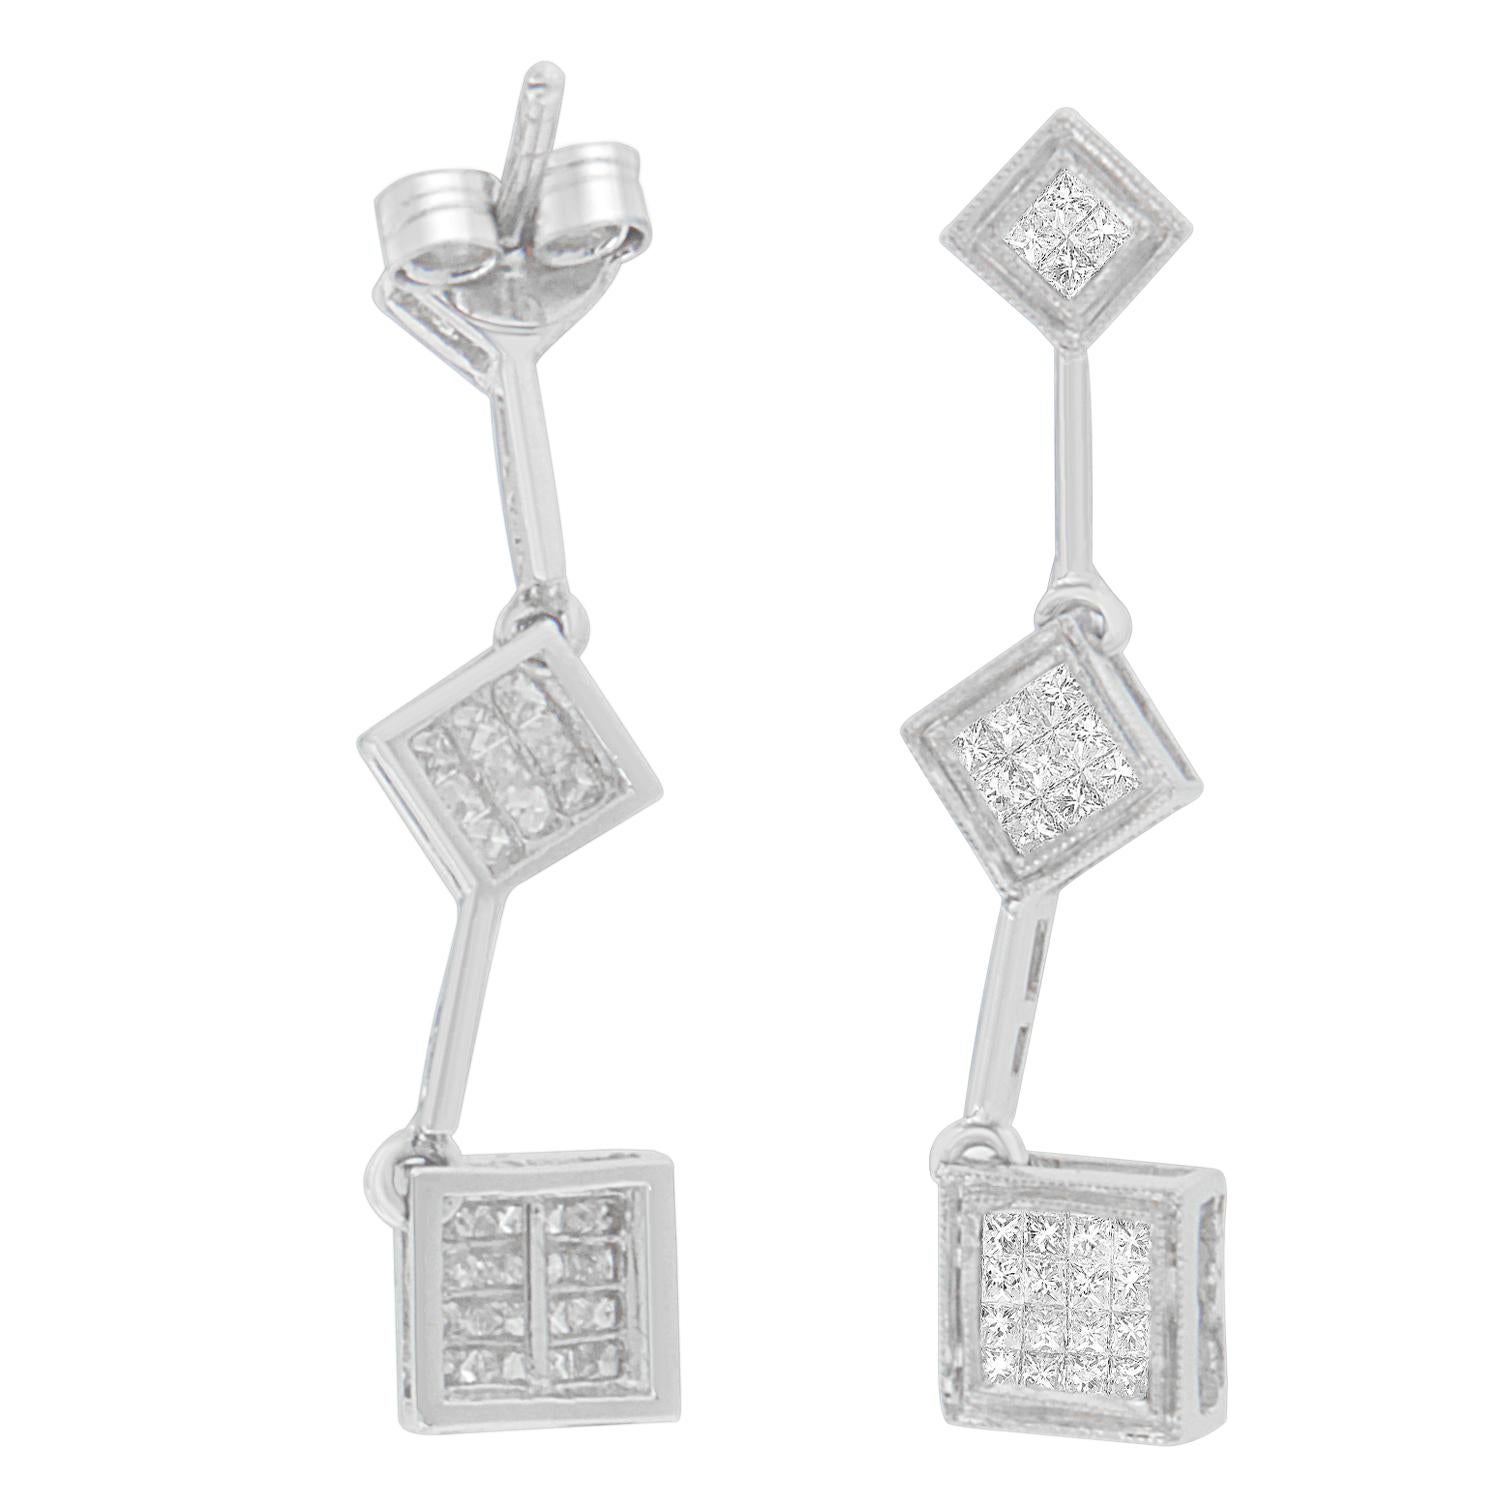 Designed to overwhelm, these stunningly designed diamond earrings are certain to make a magnificent addition to your wardrobe. Composed of 14 karats white gold, the earrings are buffed to shine high and features trio of square accents. The elegant